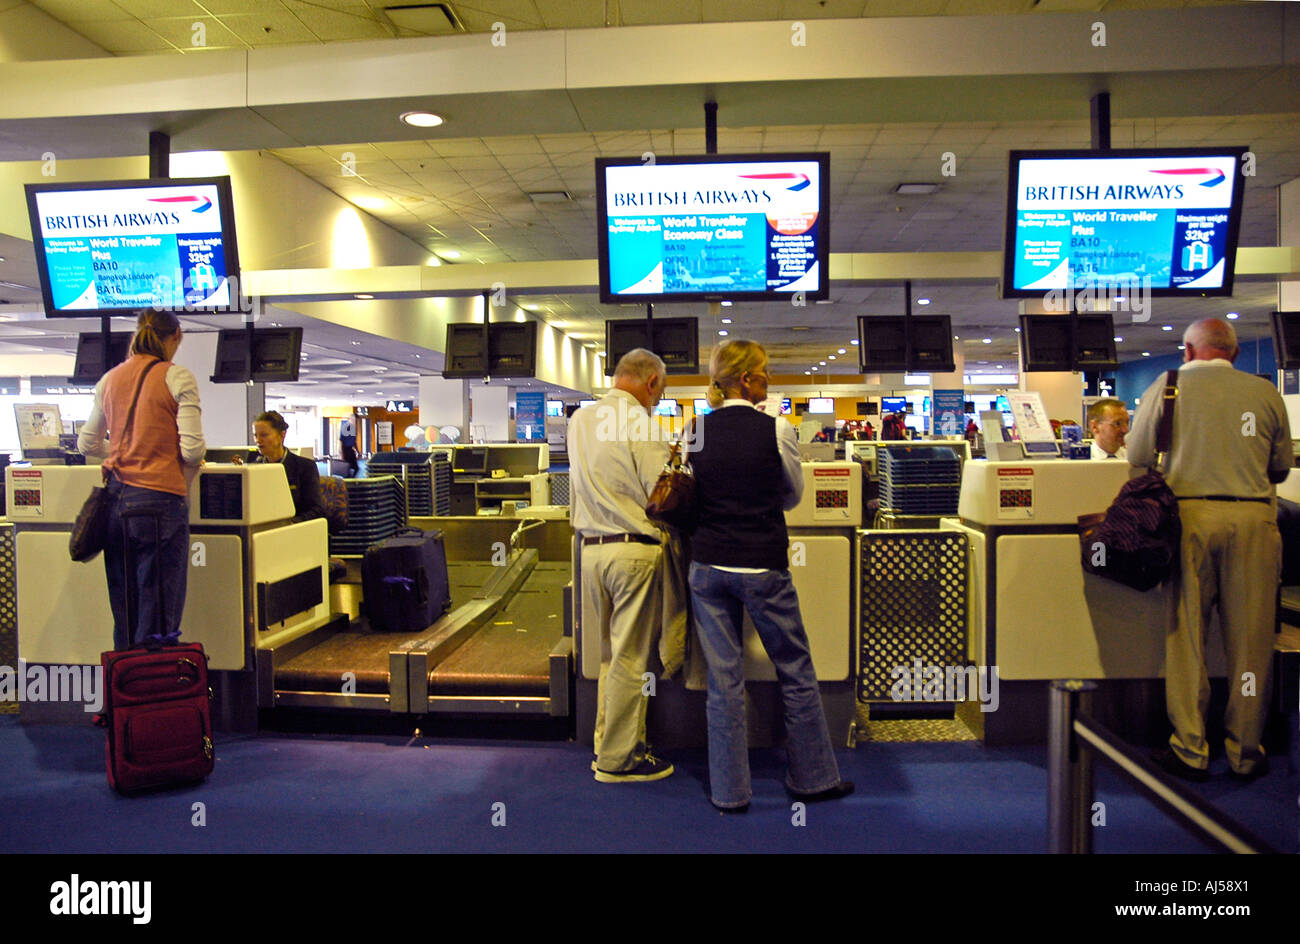 People waiting to register their luggages and get their boarding card at the check-in counter of the Sydney airport, Australia. Stock Photo